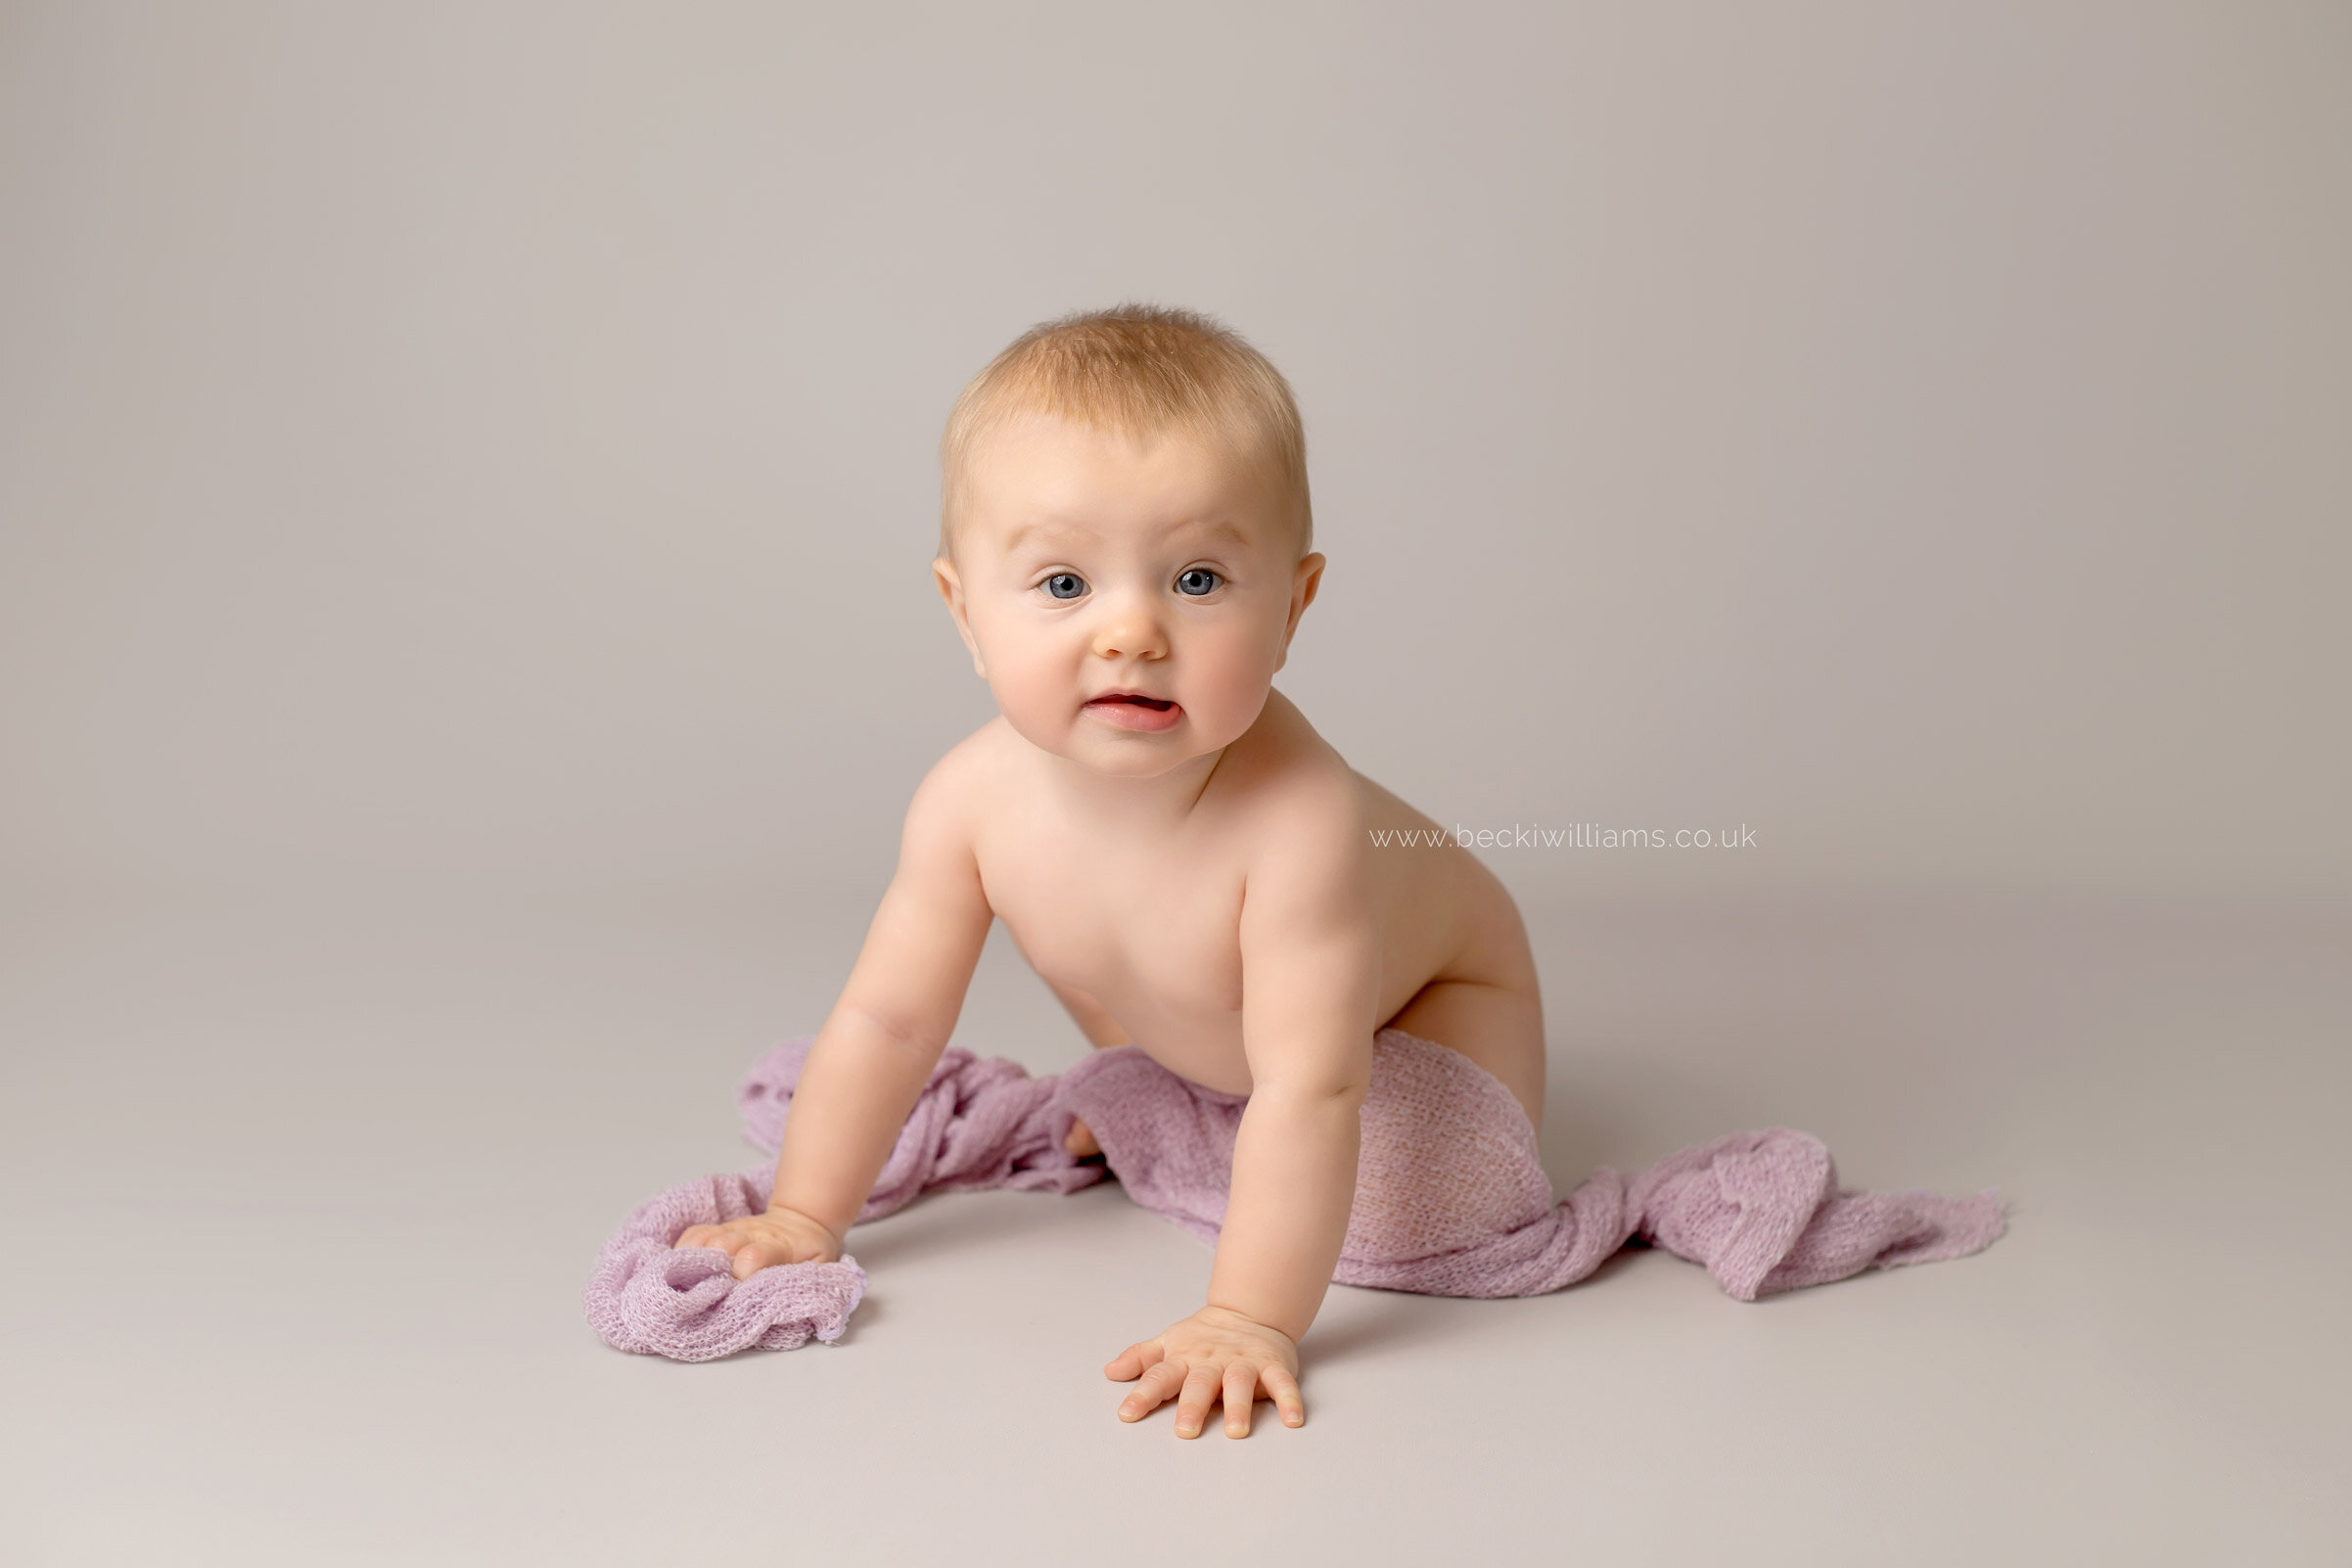 9 month old baby girl crawling towards the camera on a light grey backdrop